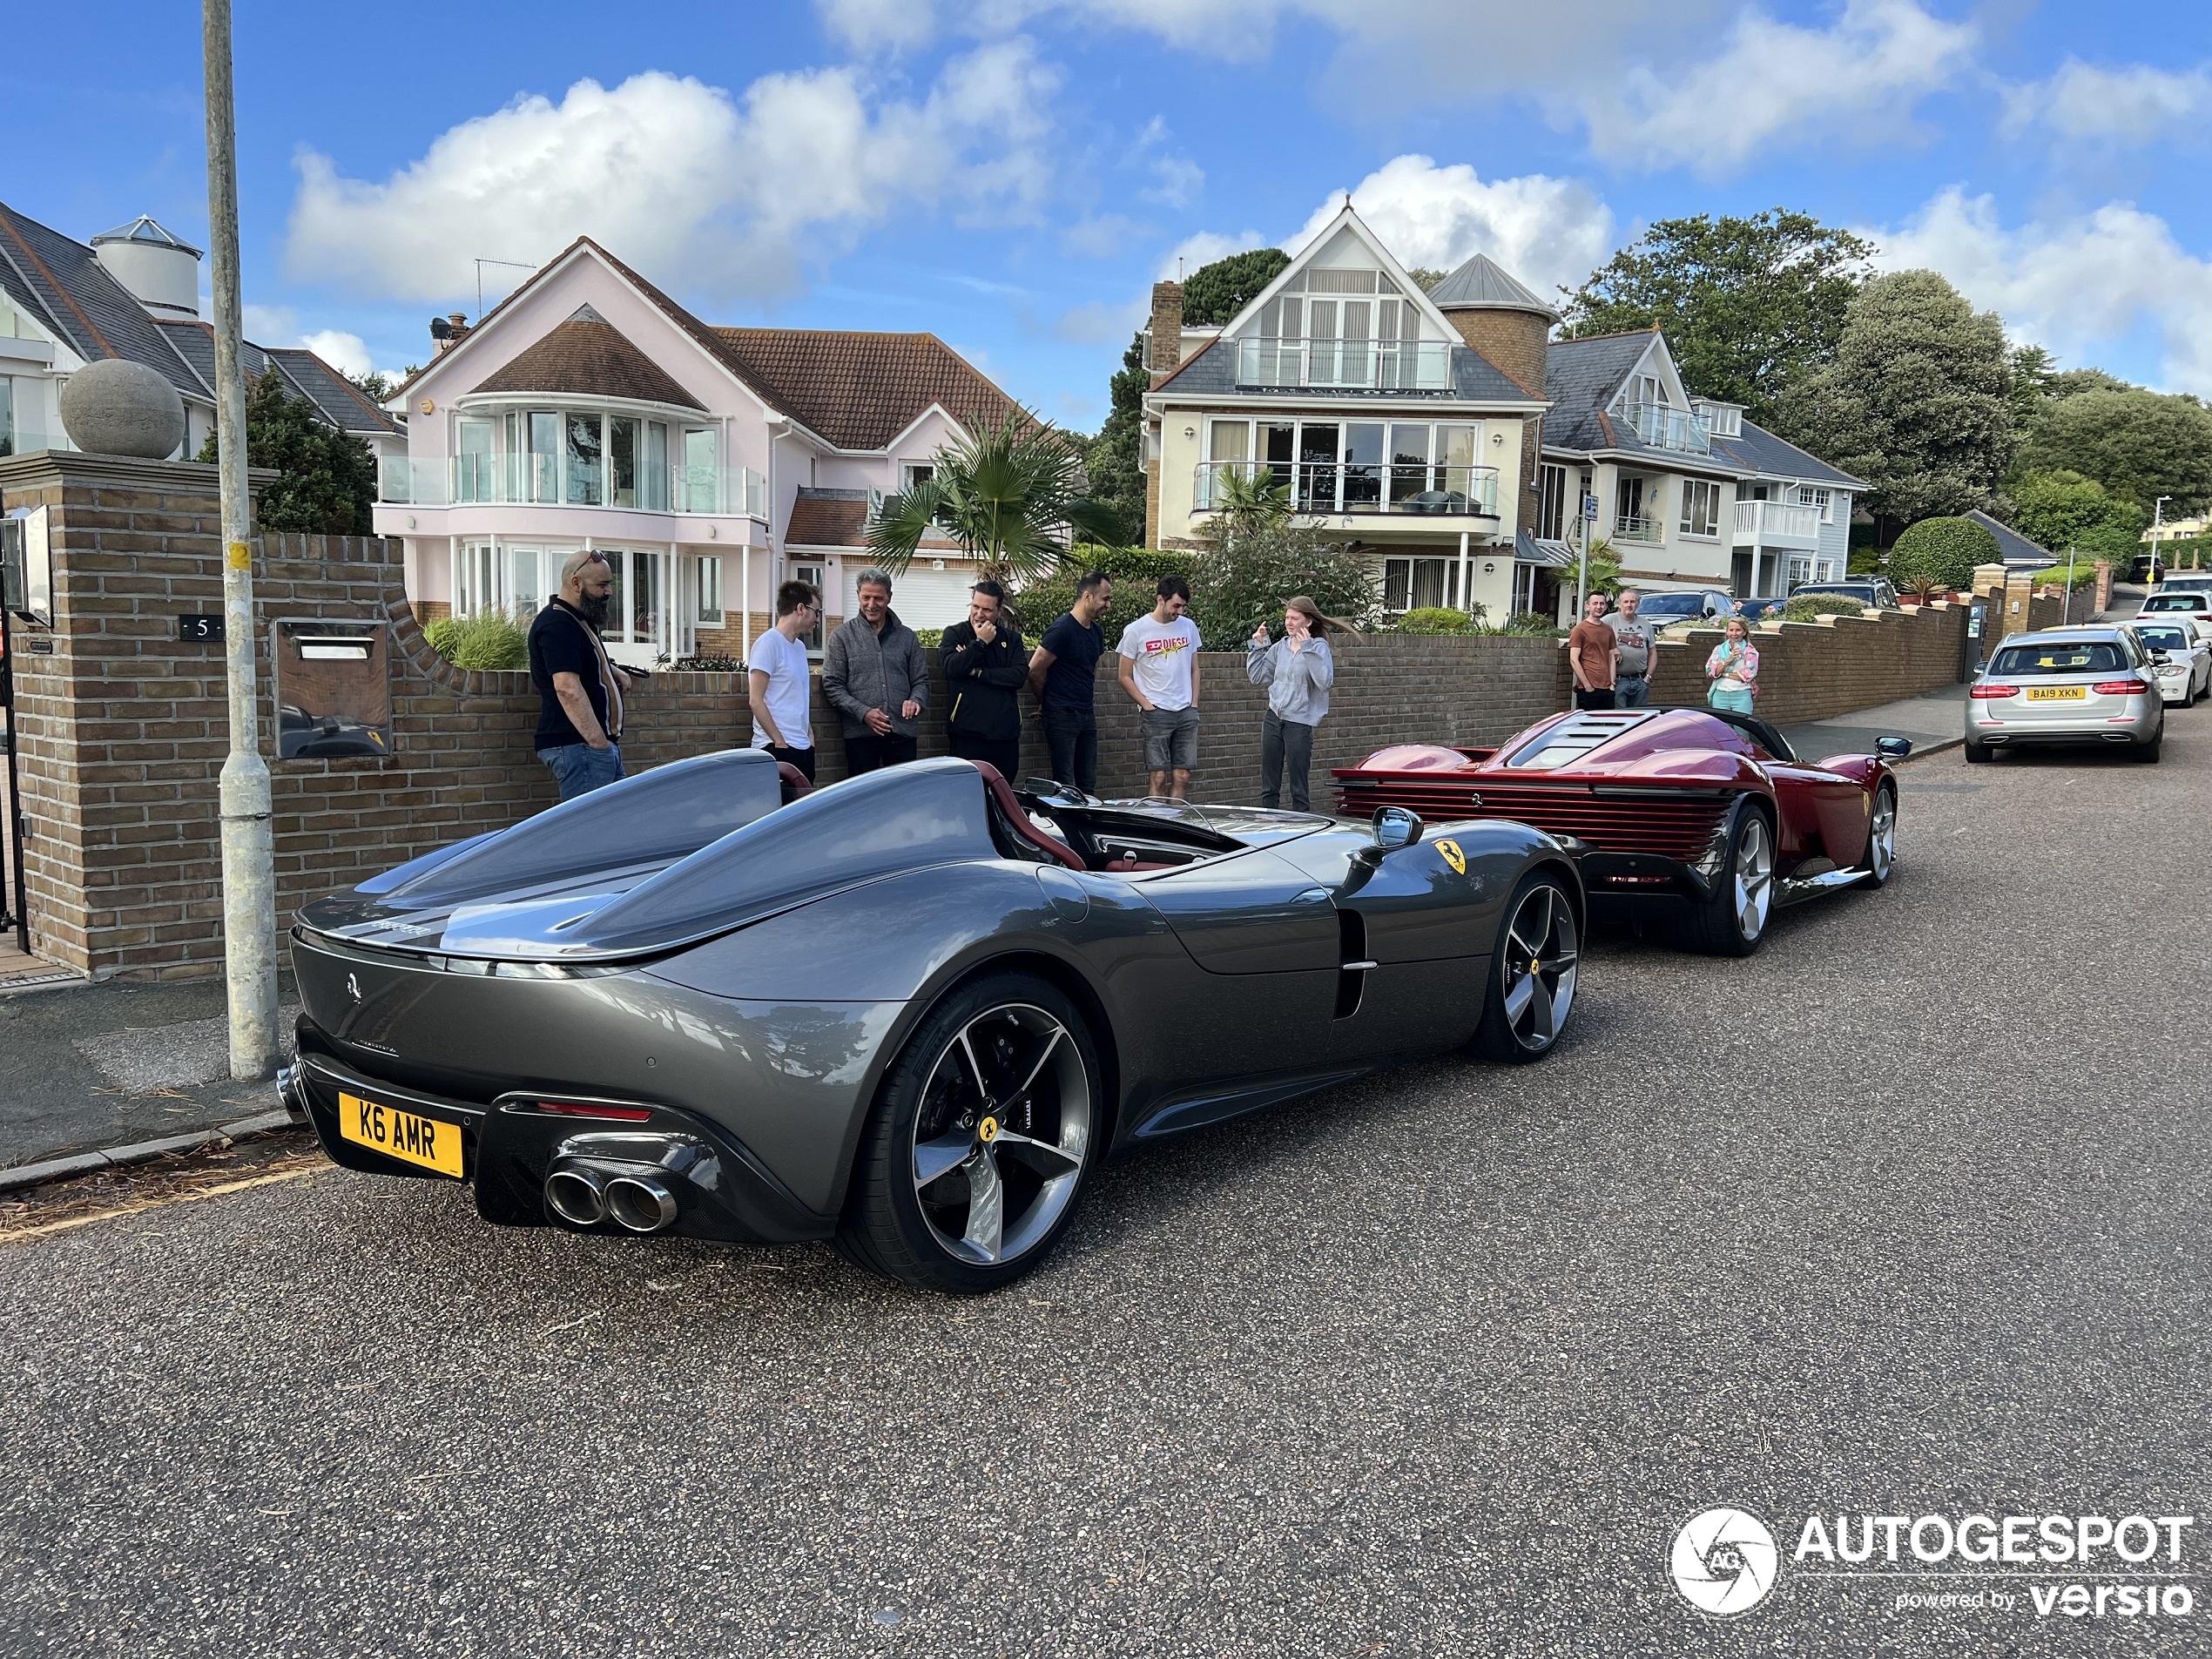 A Monza SP2 shows up in Poole